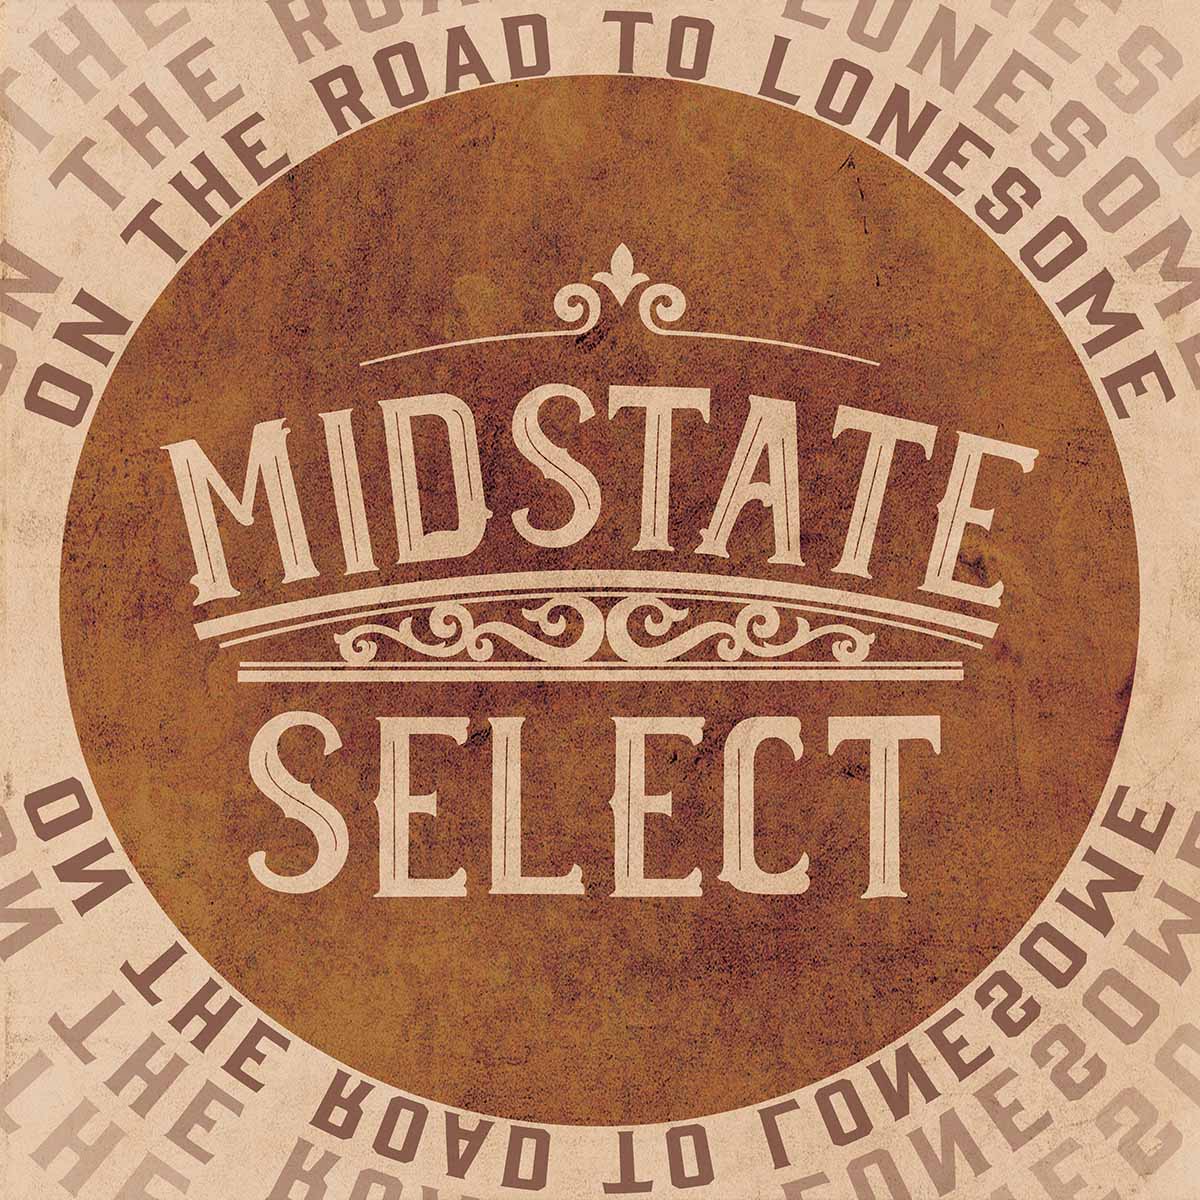 Midstate Select